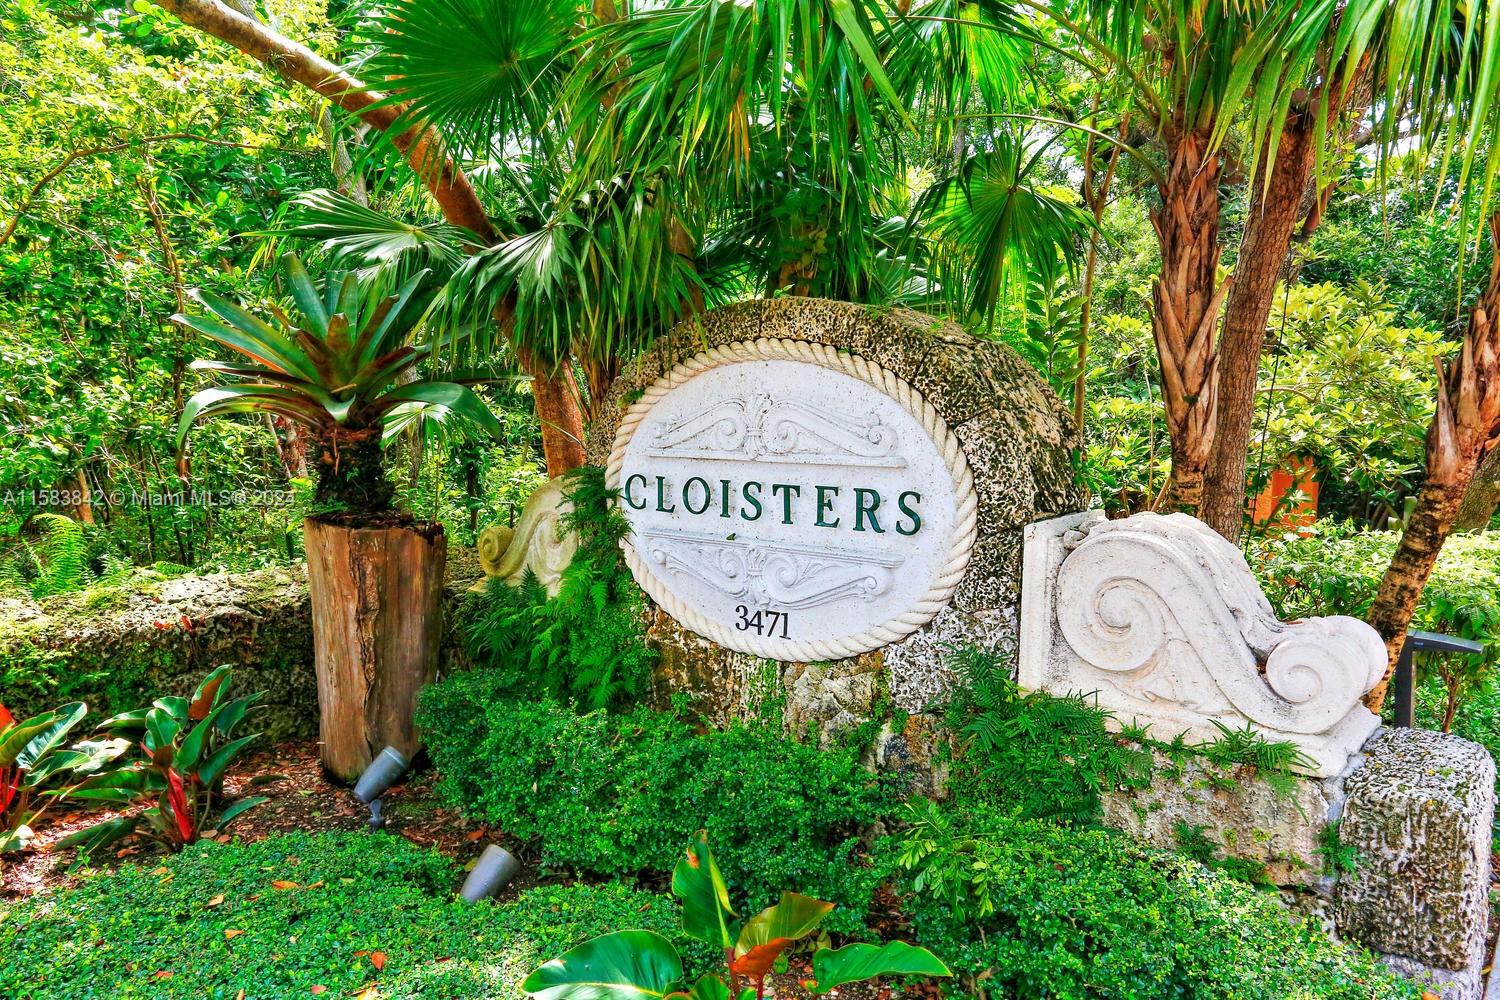 a view of a sign in a garden